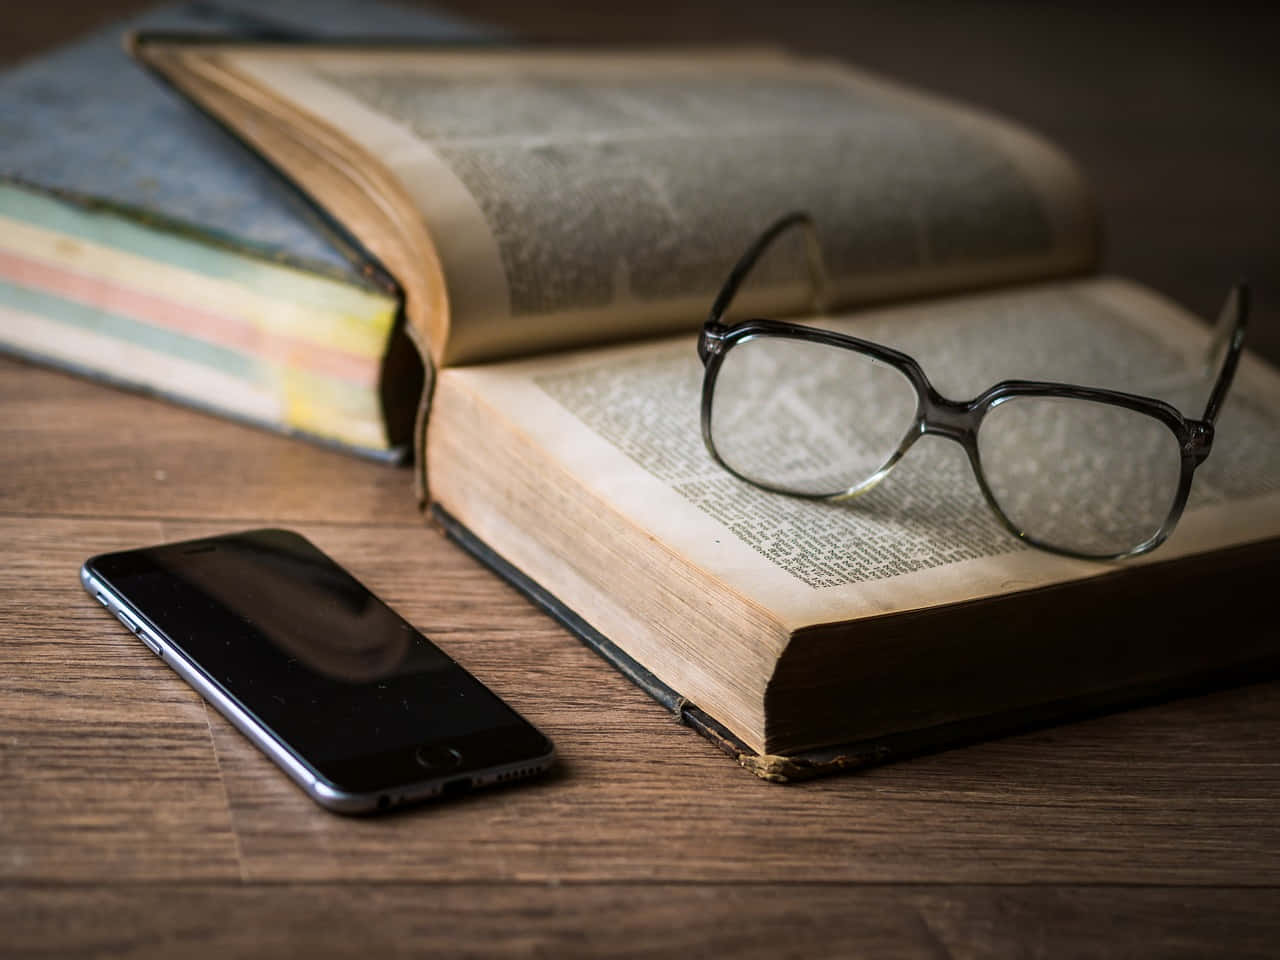 A Book, Glasses, And A Phone On A Wooden Table